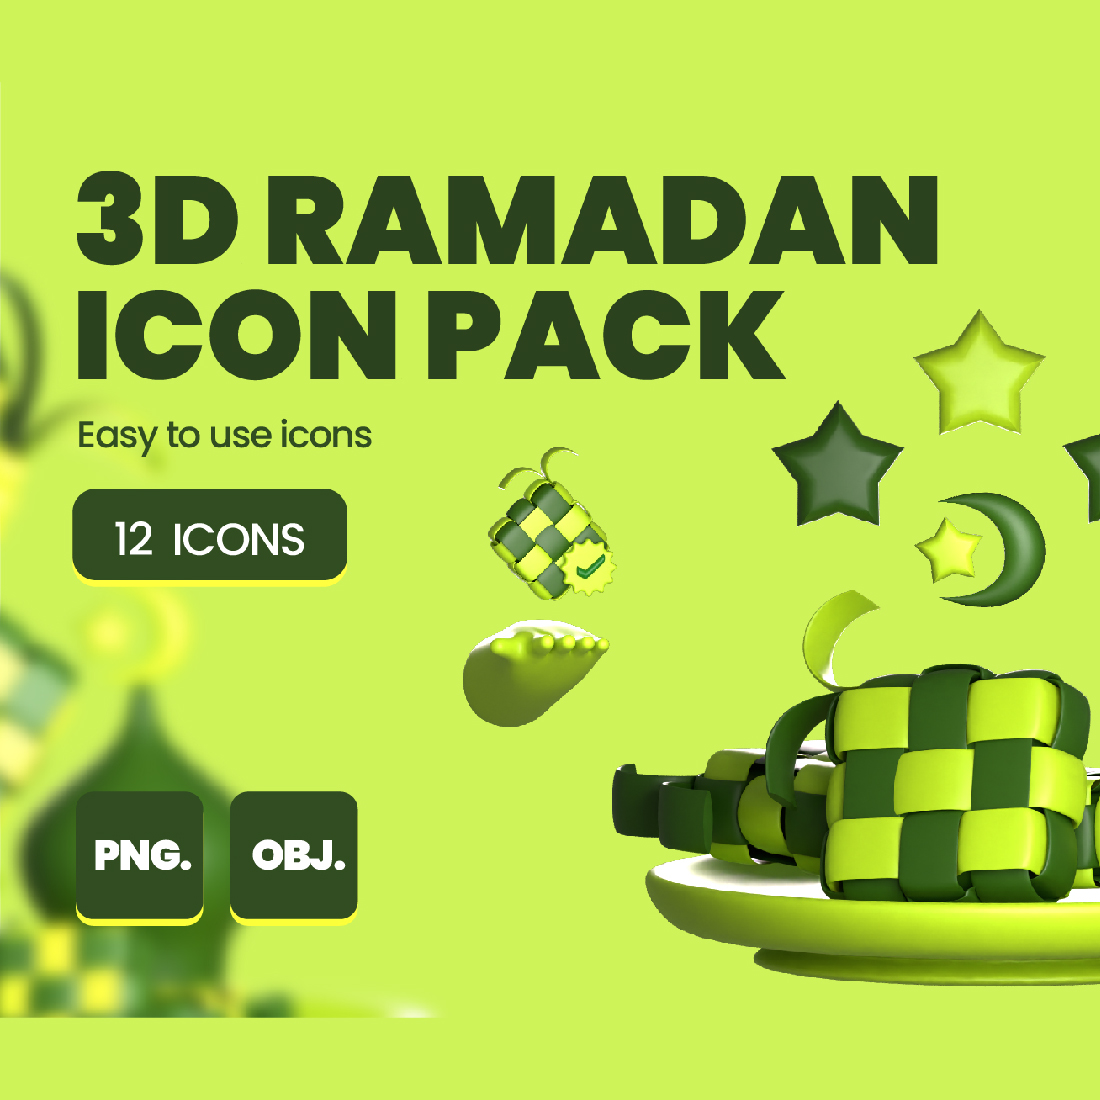 3D RAMADAN ICON PACK preview image.